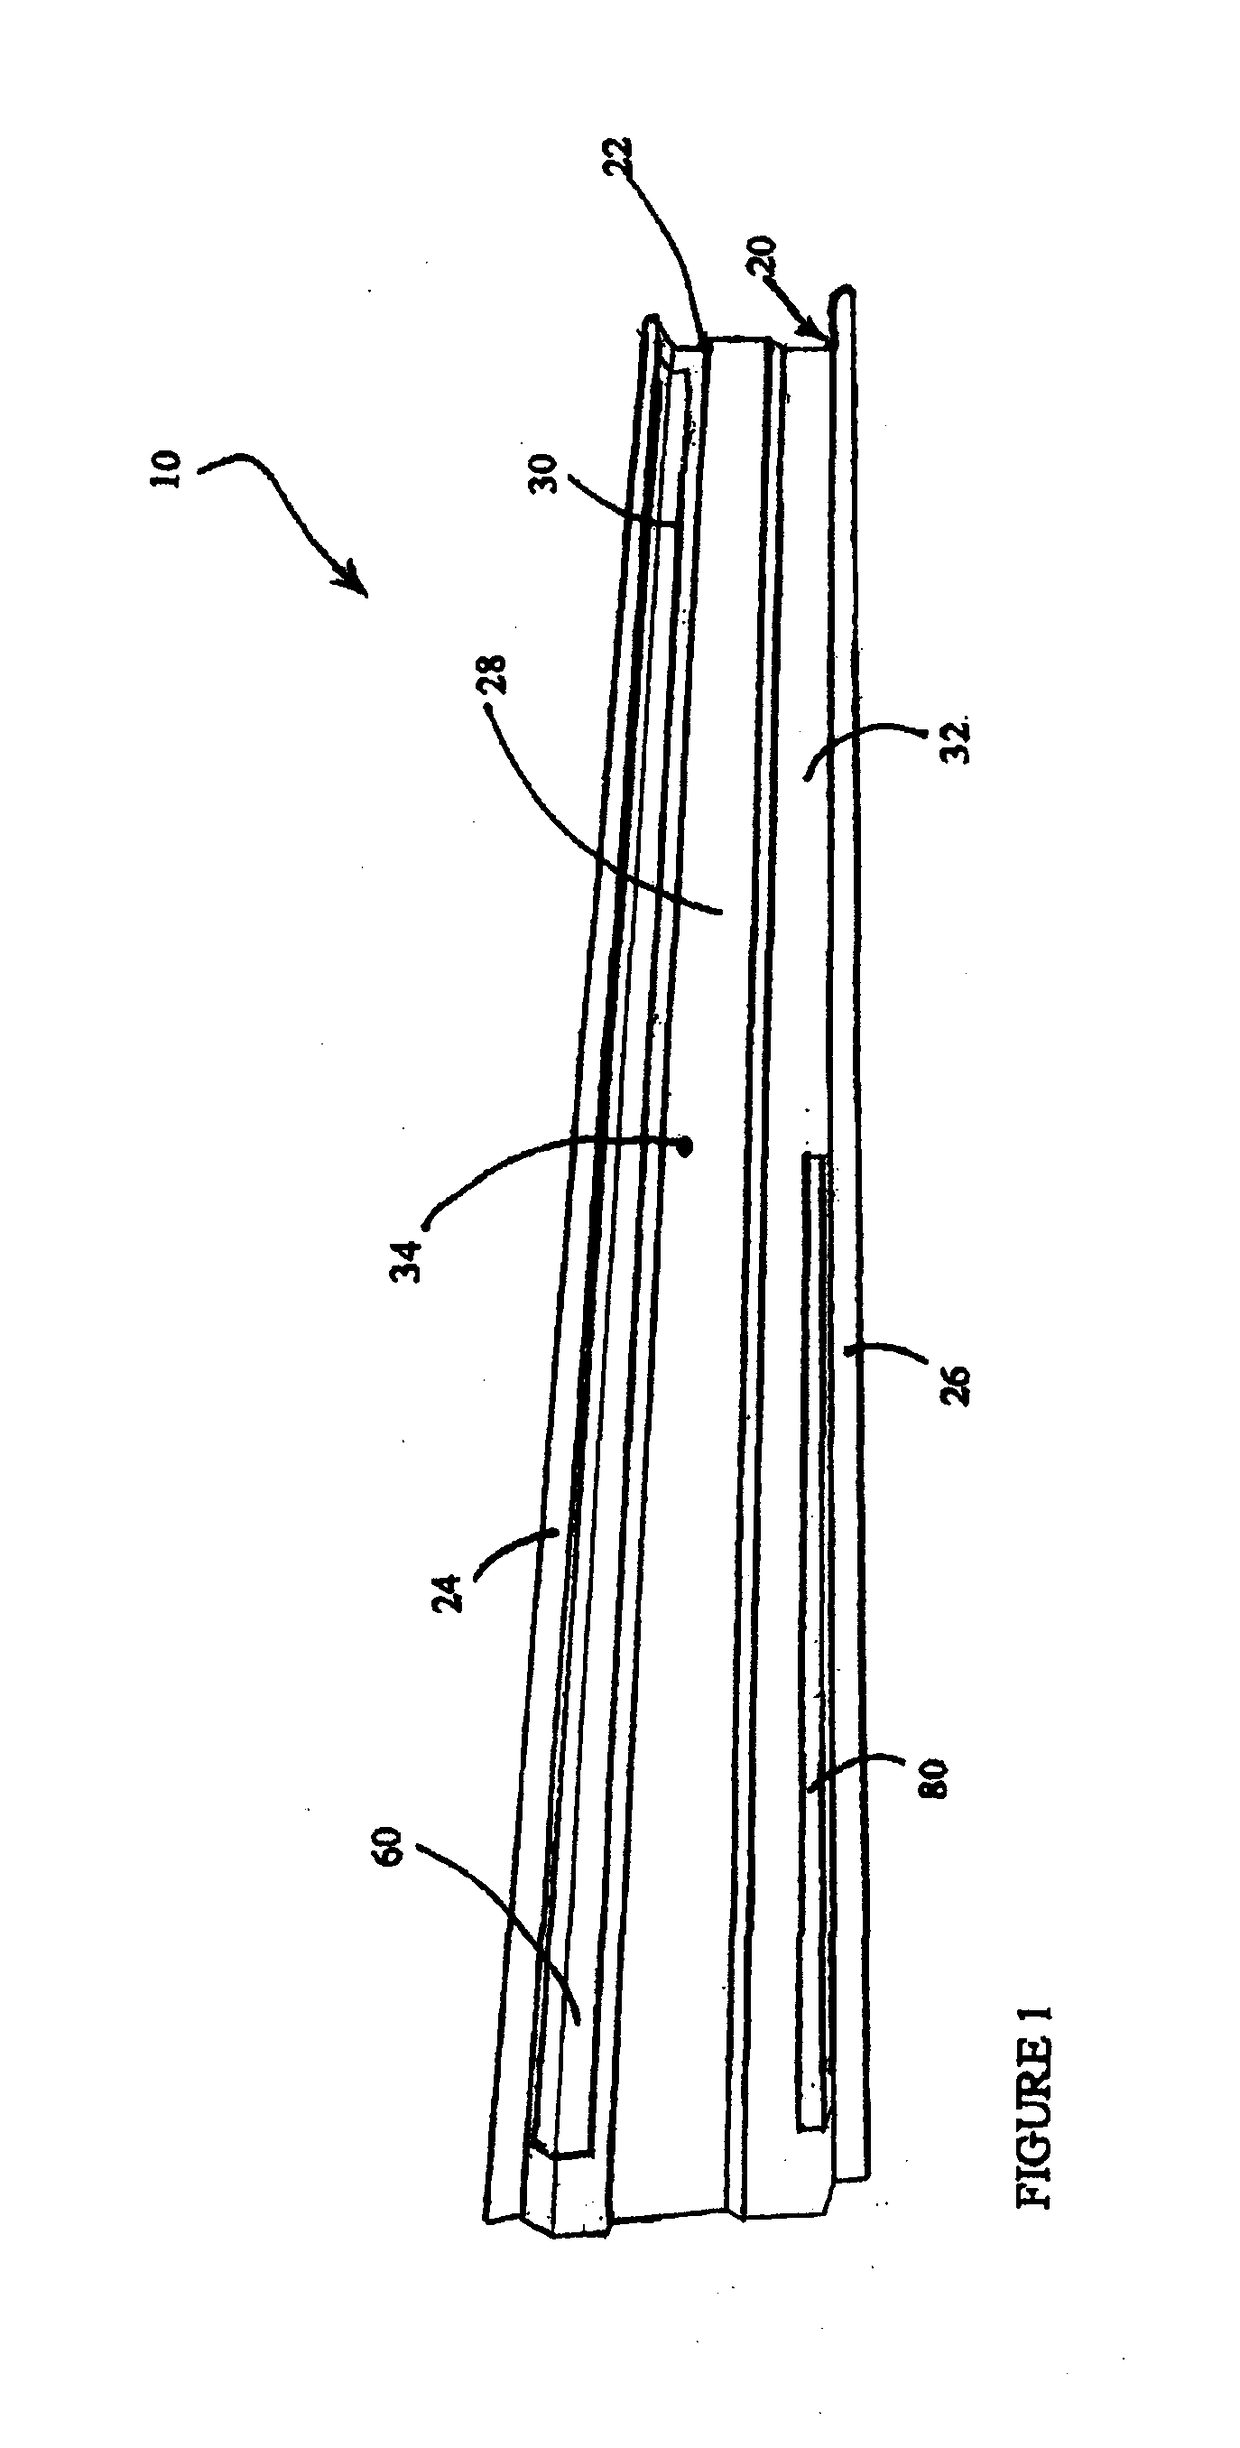 Process for Forming Reinforced Rocker Panel Assembly